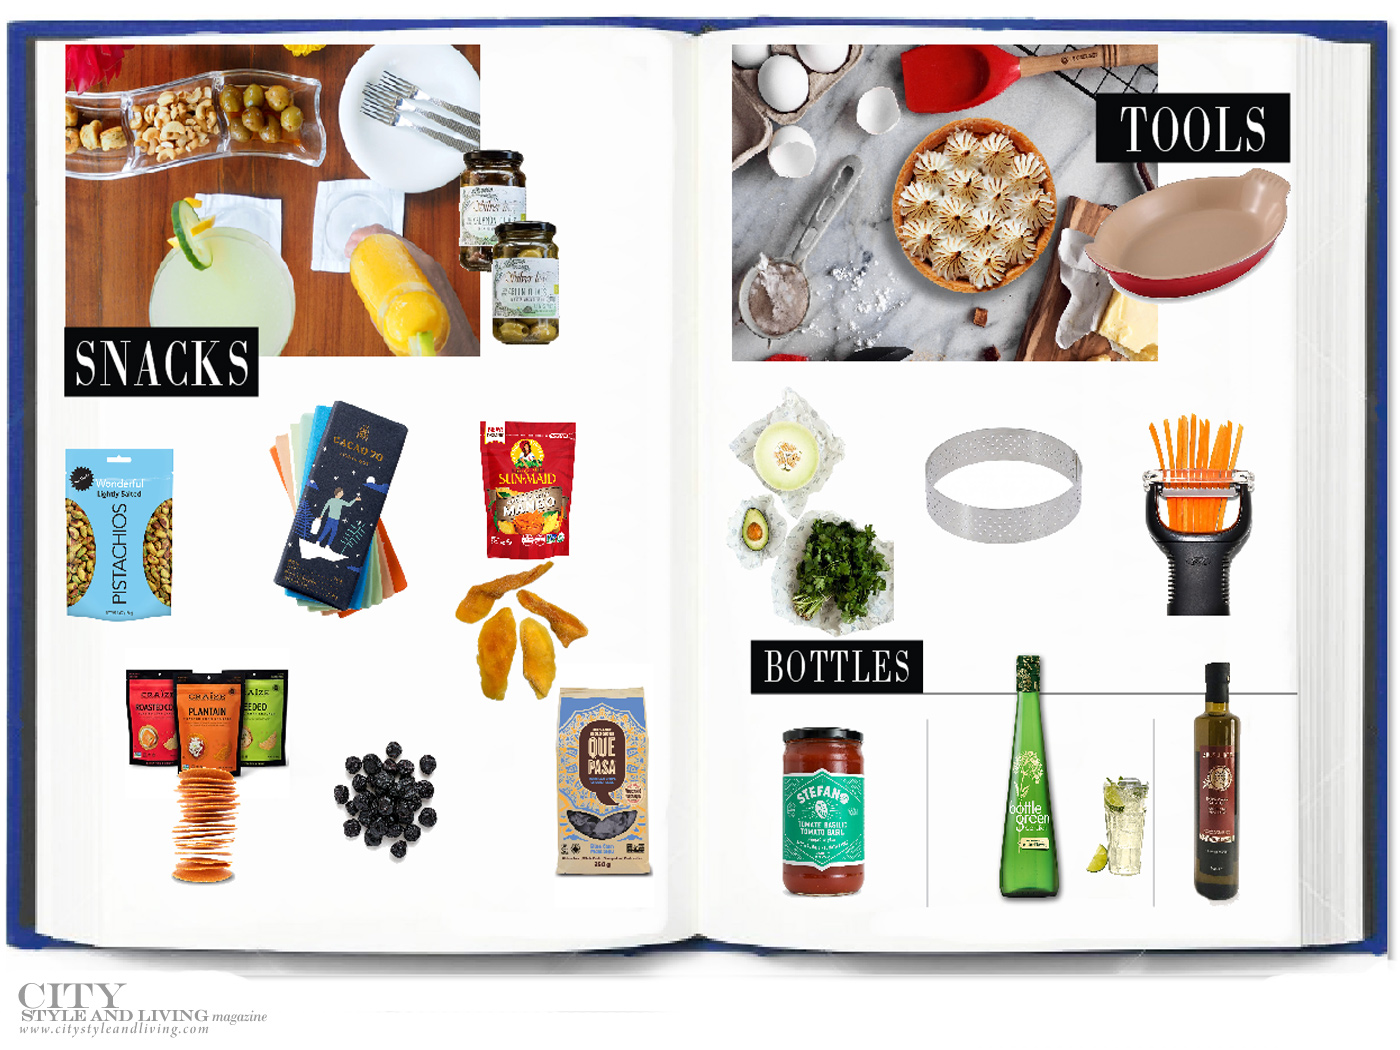 City Style and Living Magazine fall 2020 Quarantine Pantry snacks, bottles, cooking